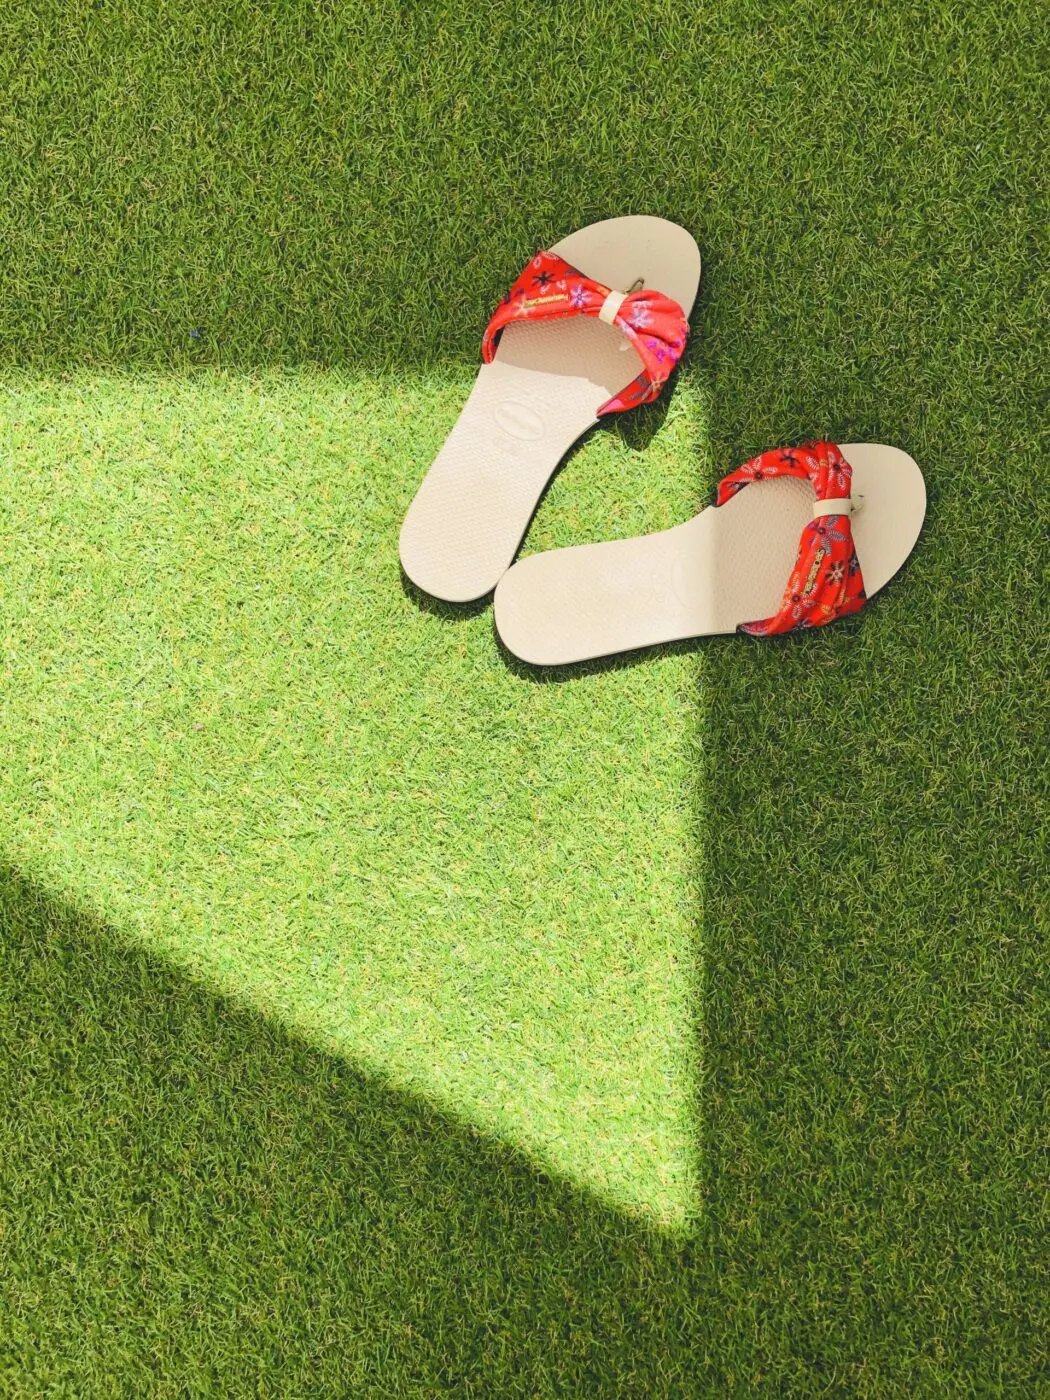 A pair of beige flip-flops with red patterned straps rests on an expanse of artificial grass, with a triangular shadow partially covering them.